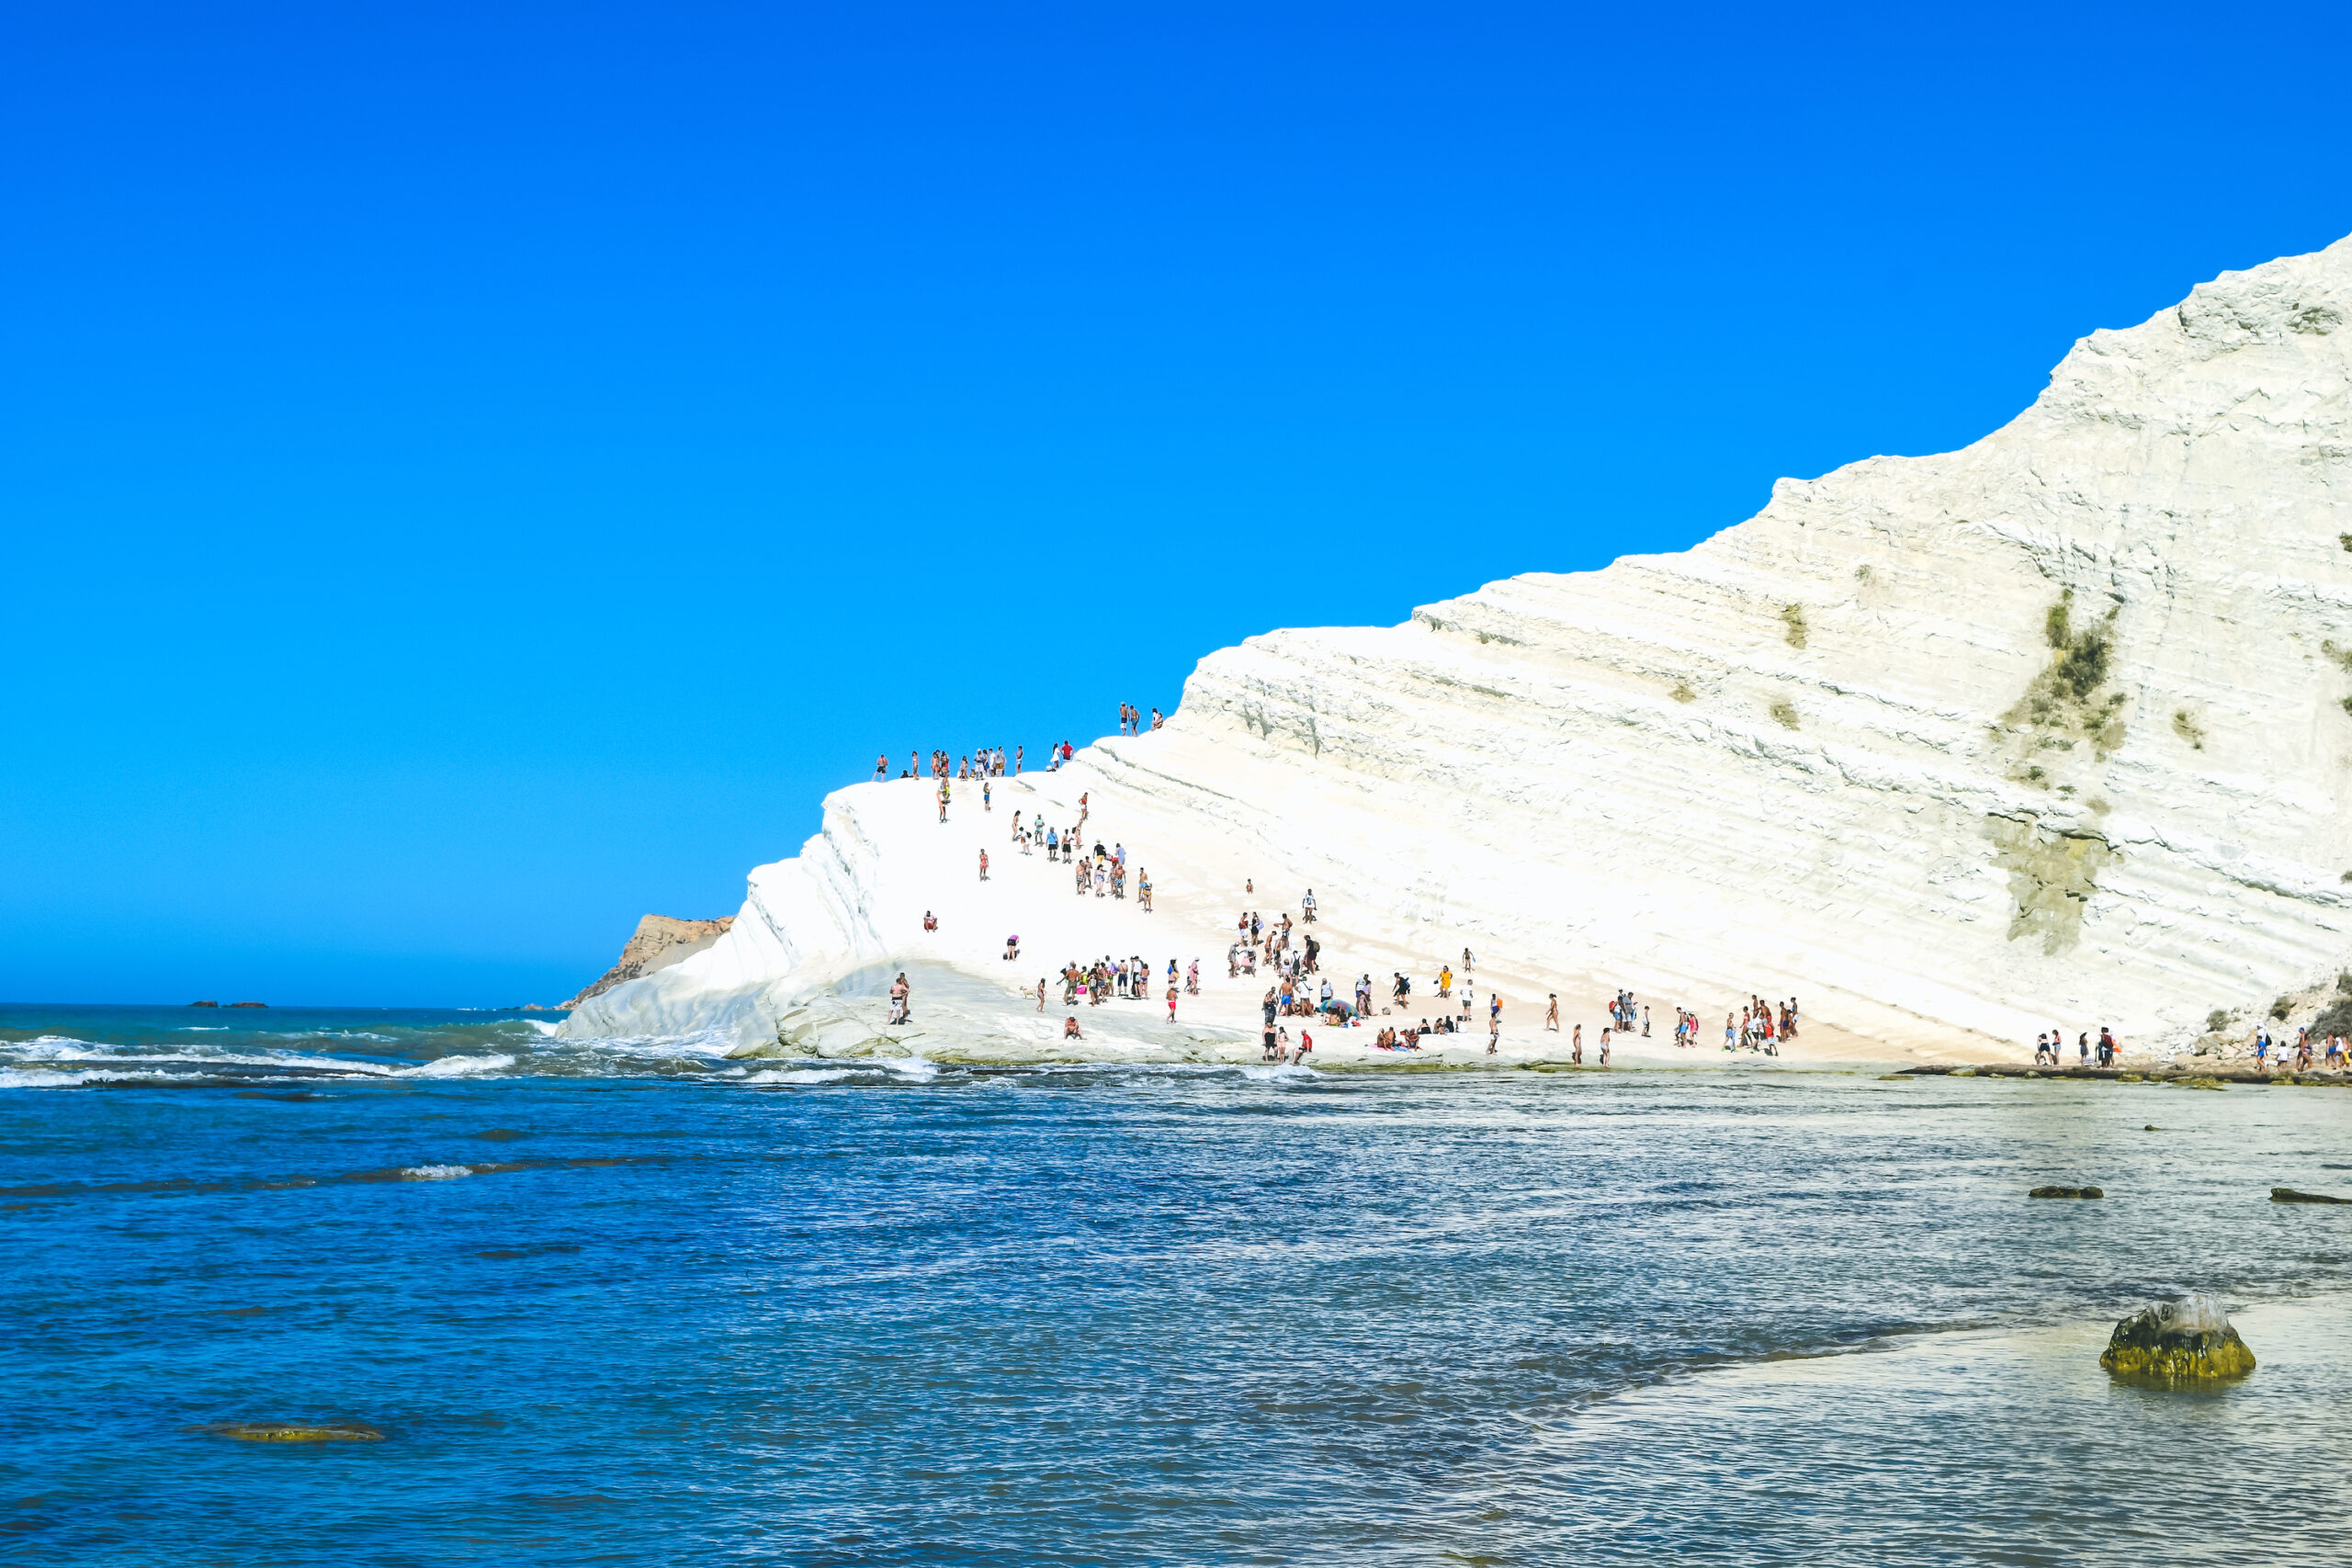 Travel guide to sicily scala dei turchi agrigento what to do see italy best time of year-2